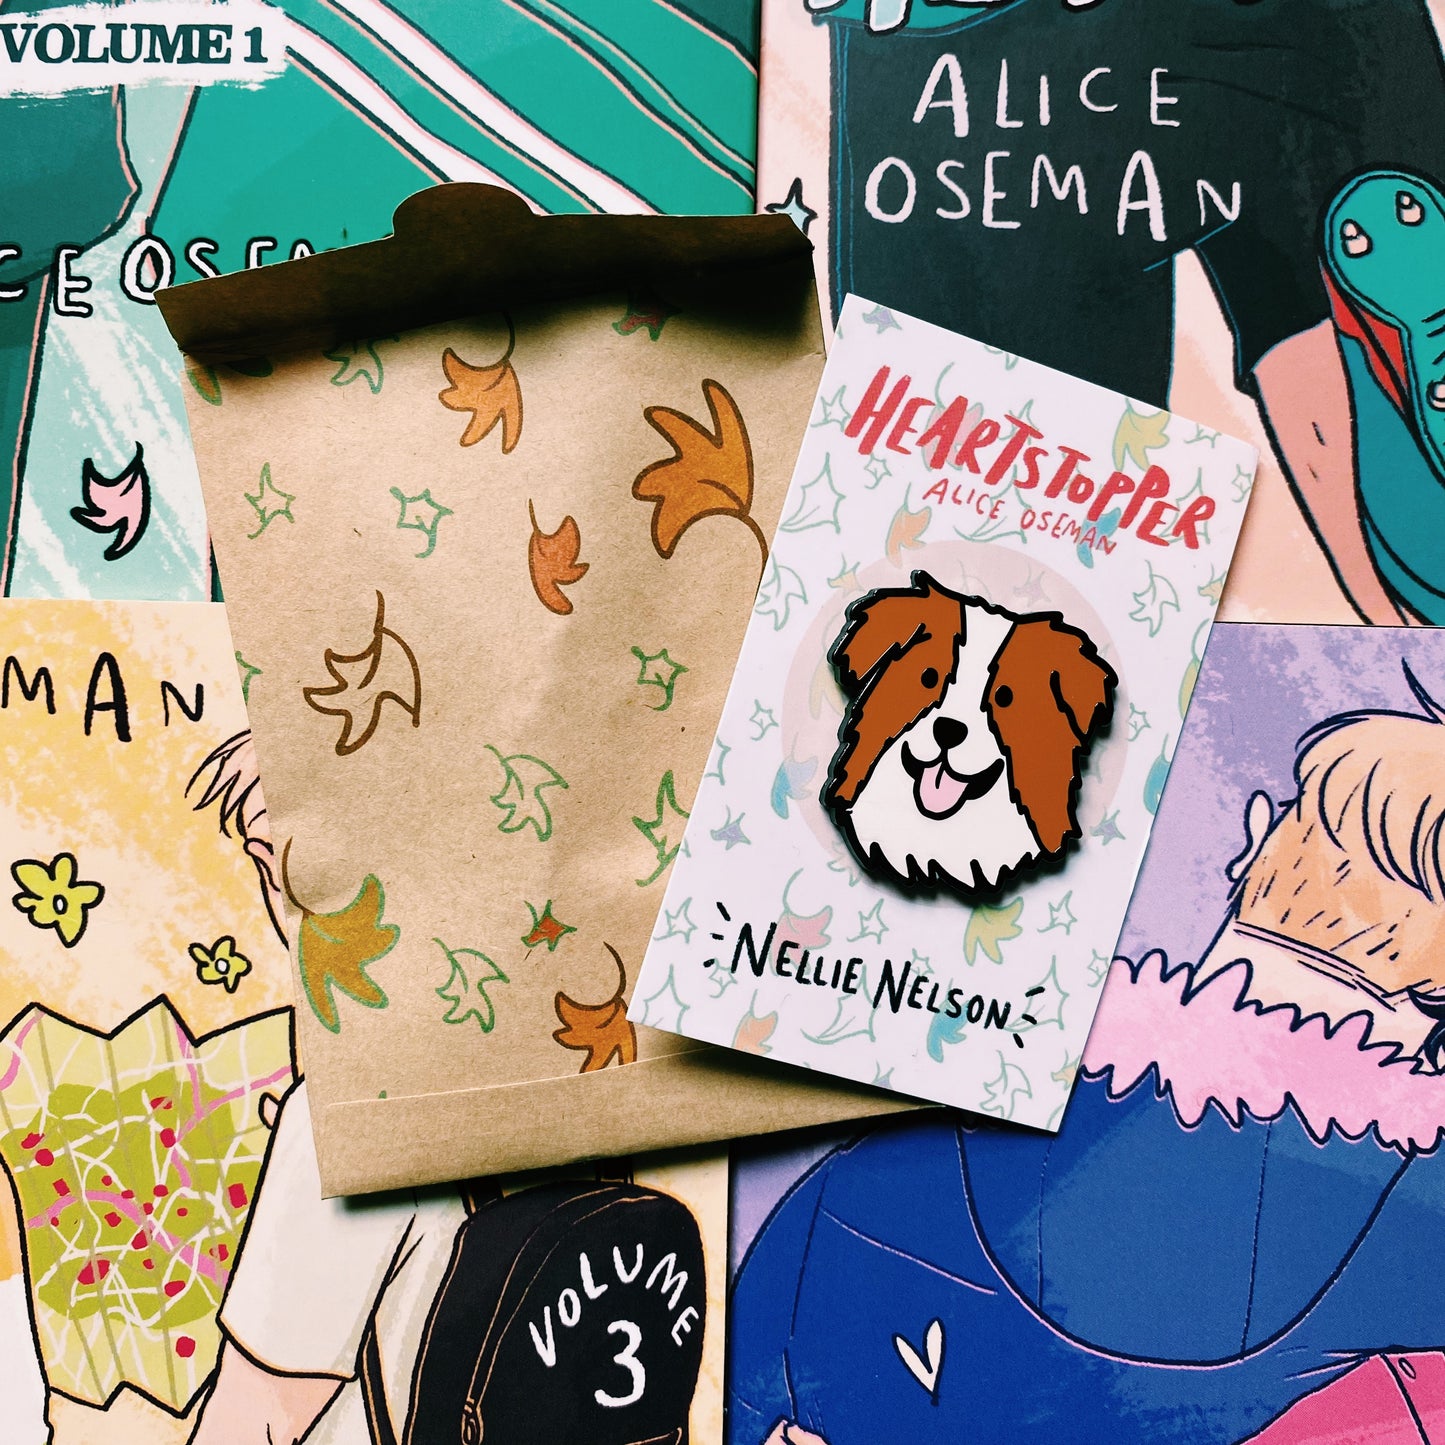 Nellie Nelson enamel pin inspired by Alice Oseman's Heartstopper series. The pin is being held in front of the Hearstopper graphic novels and exclusive LitPins packing paper. 